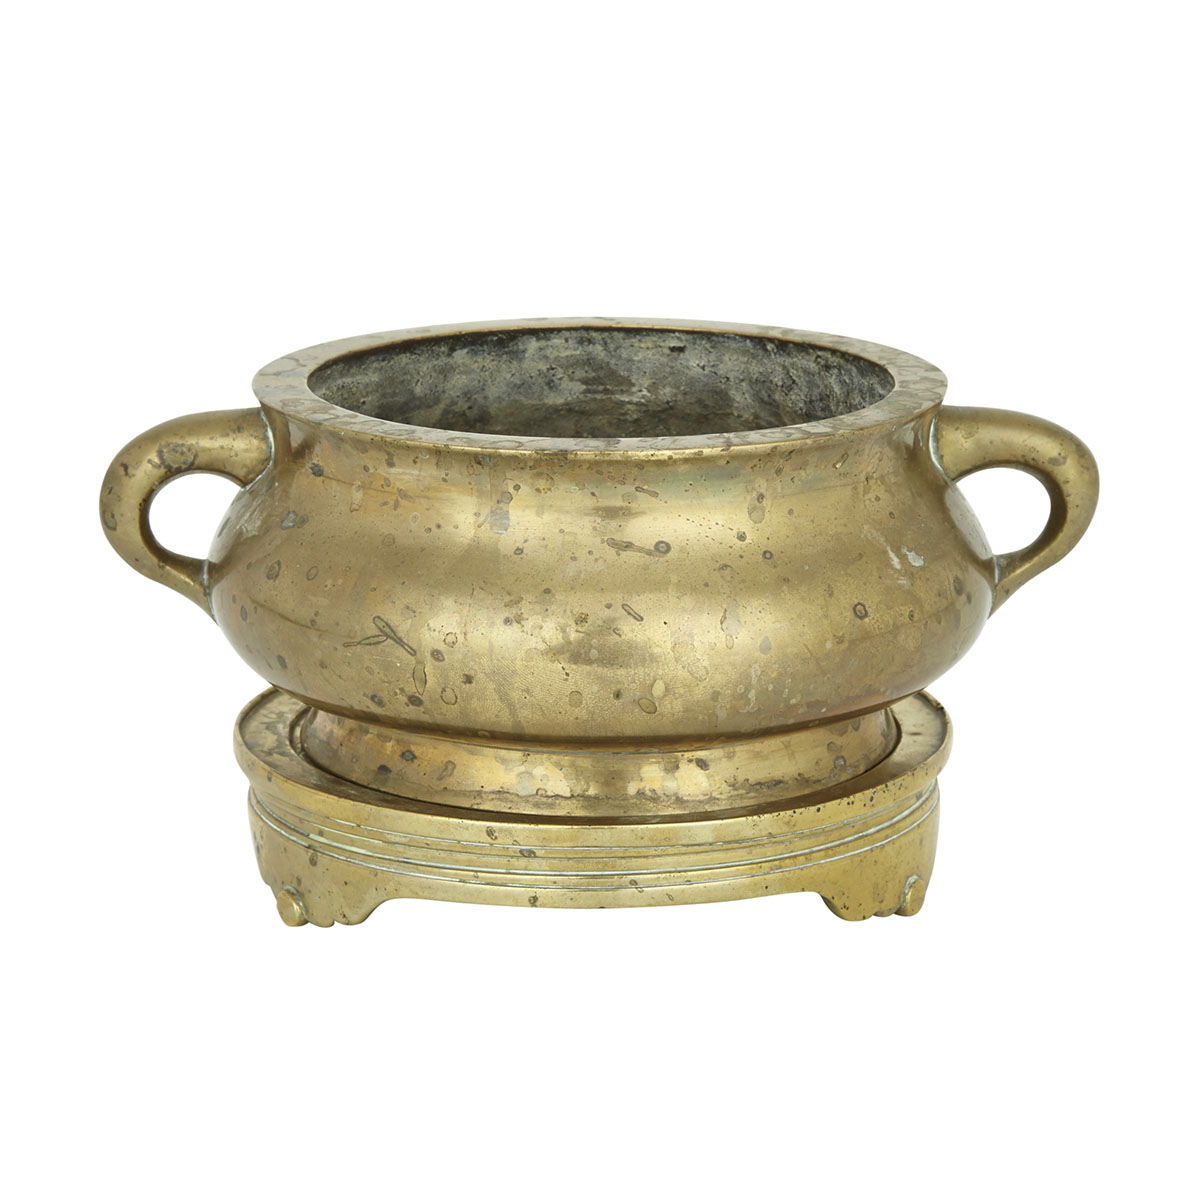 Bronze Censer with Fitted Stand, 19th Century or Earlier